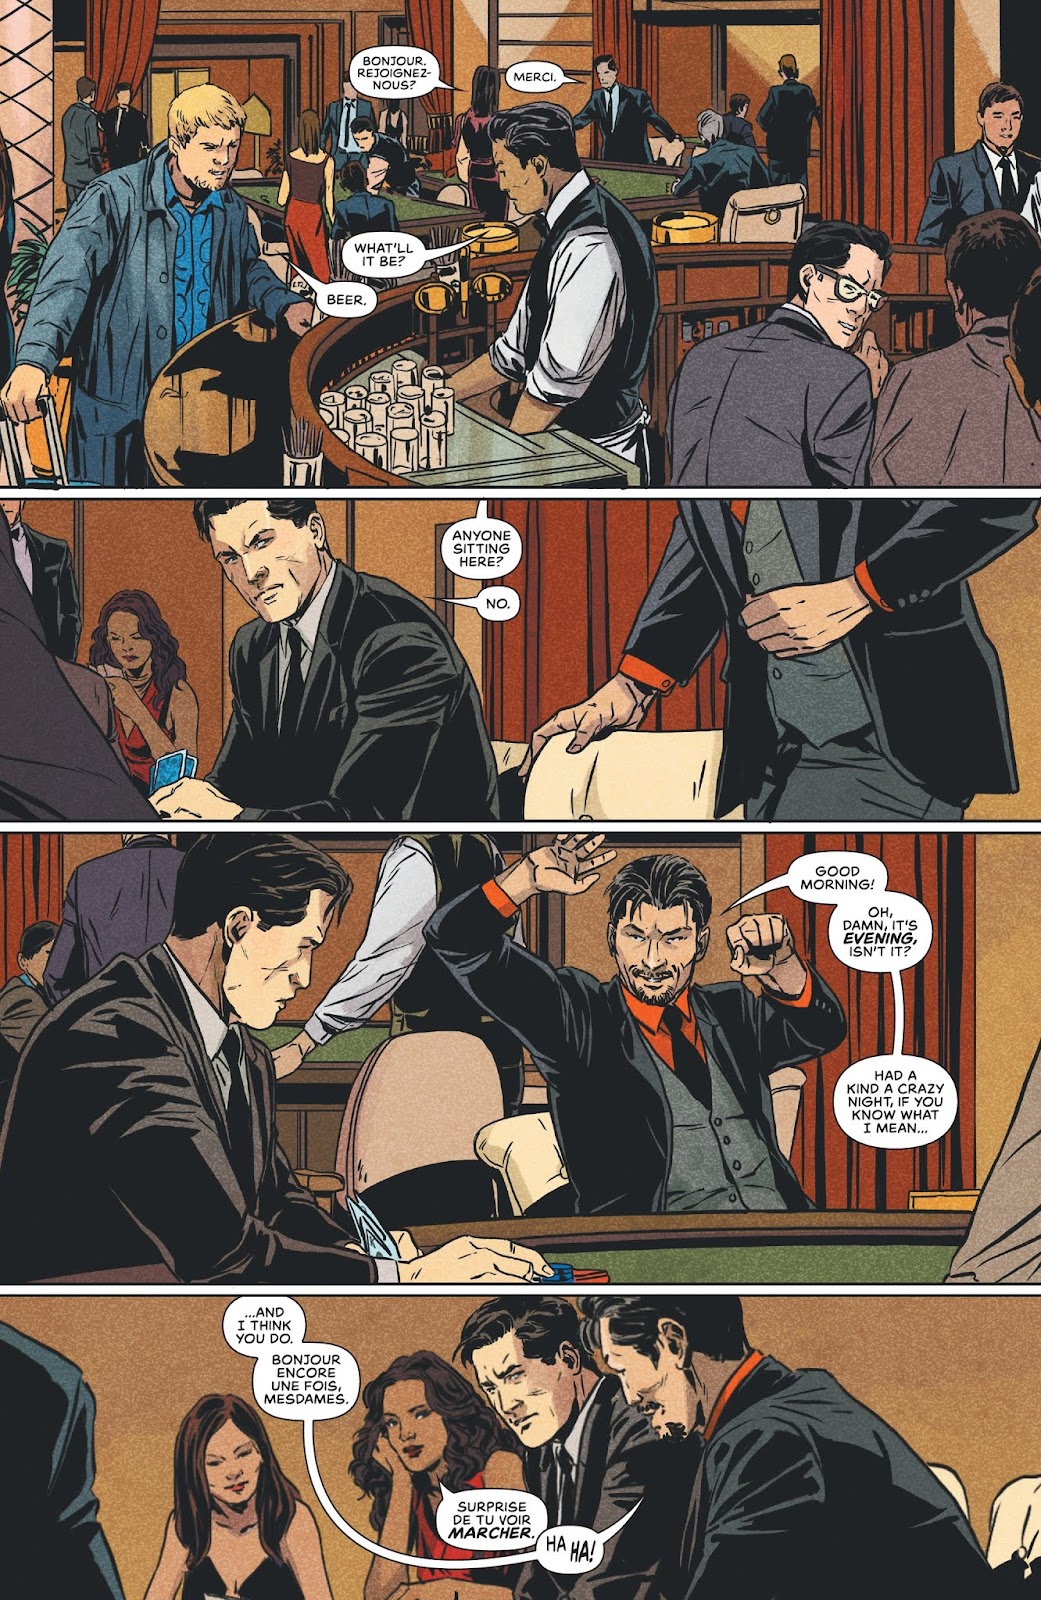 James Bond: 007 issue 1 - Page 8